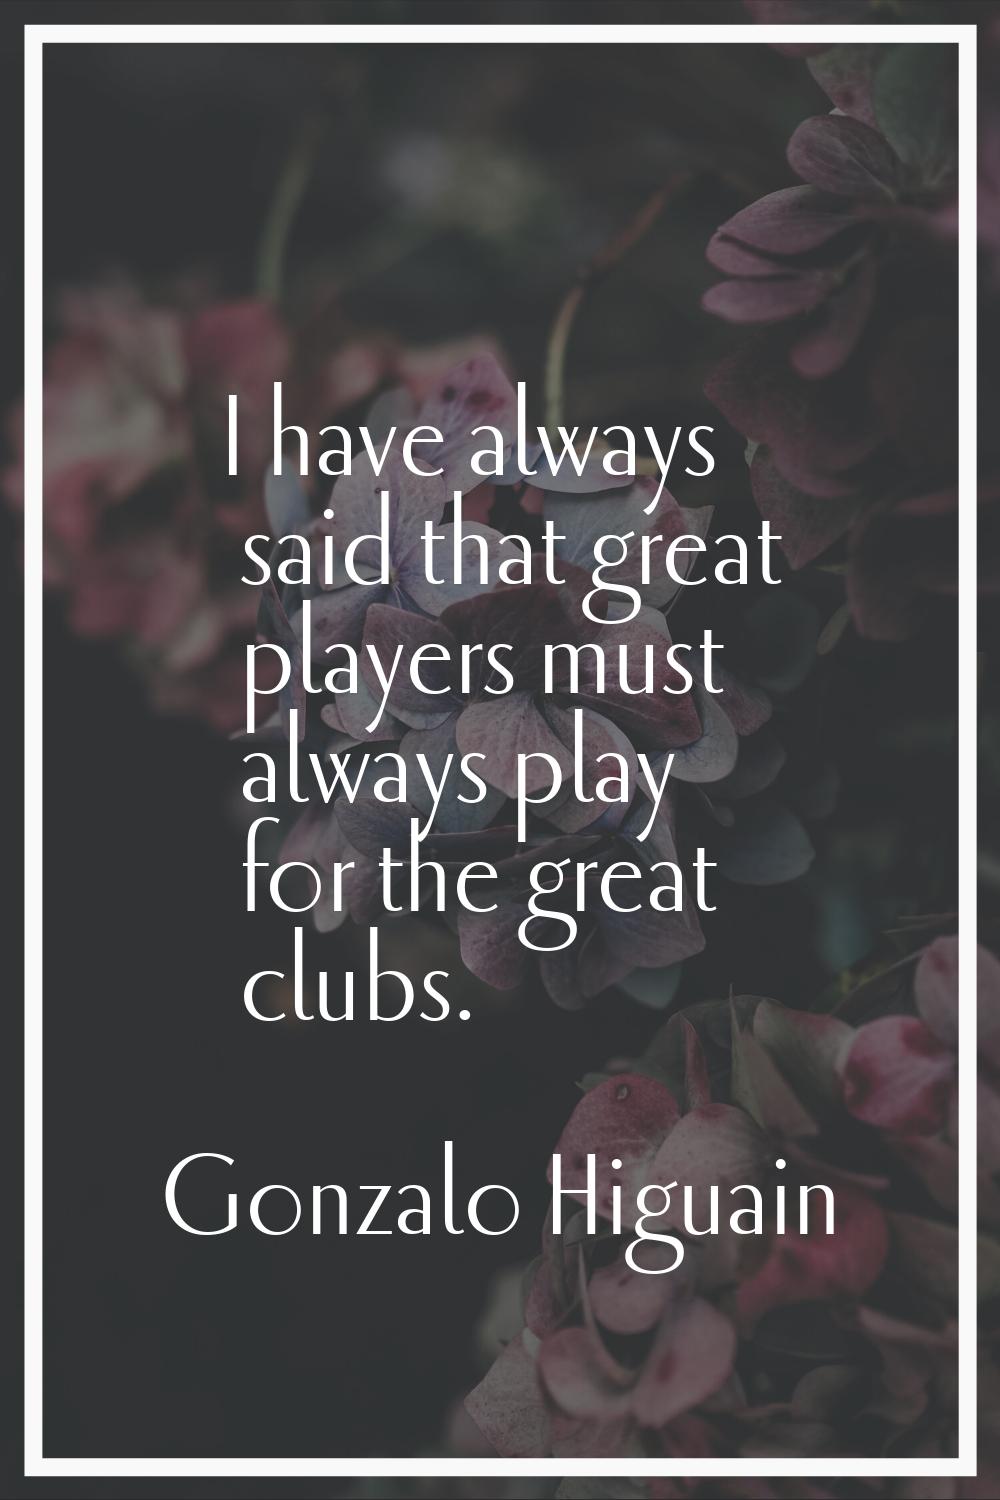 I have always said that great players must always play for the great clubs.